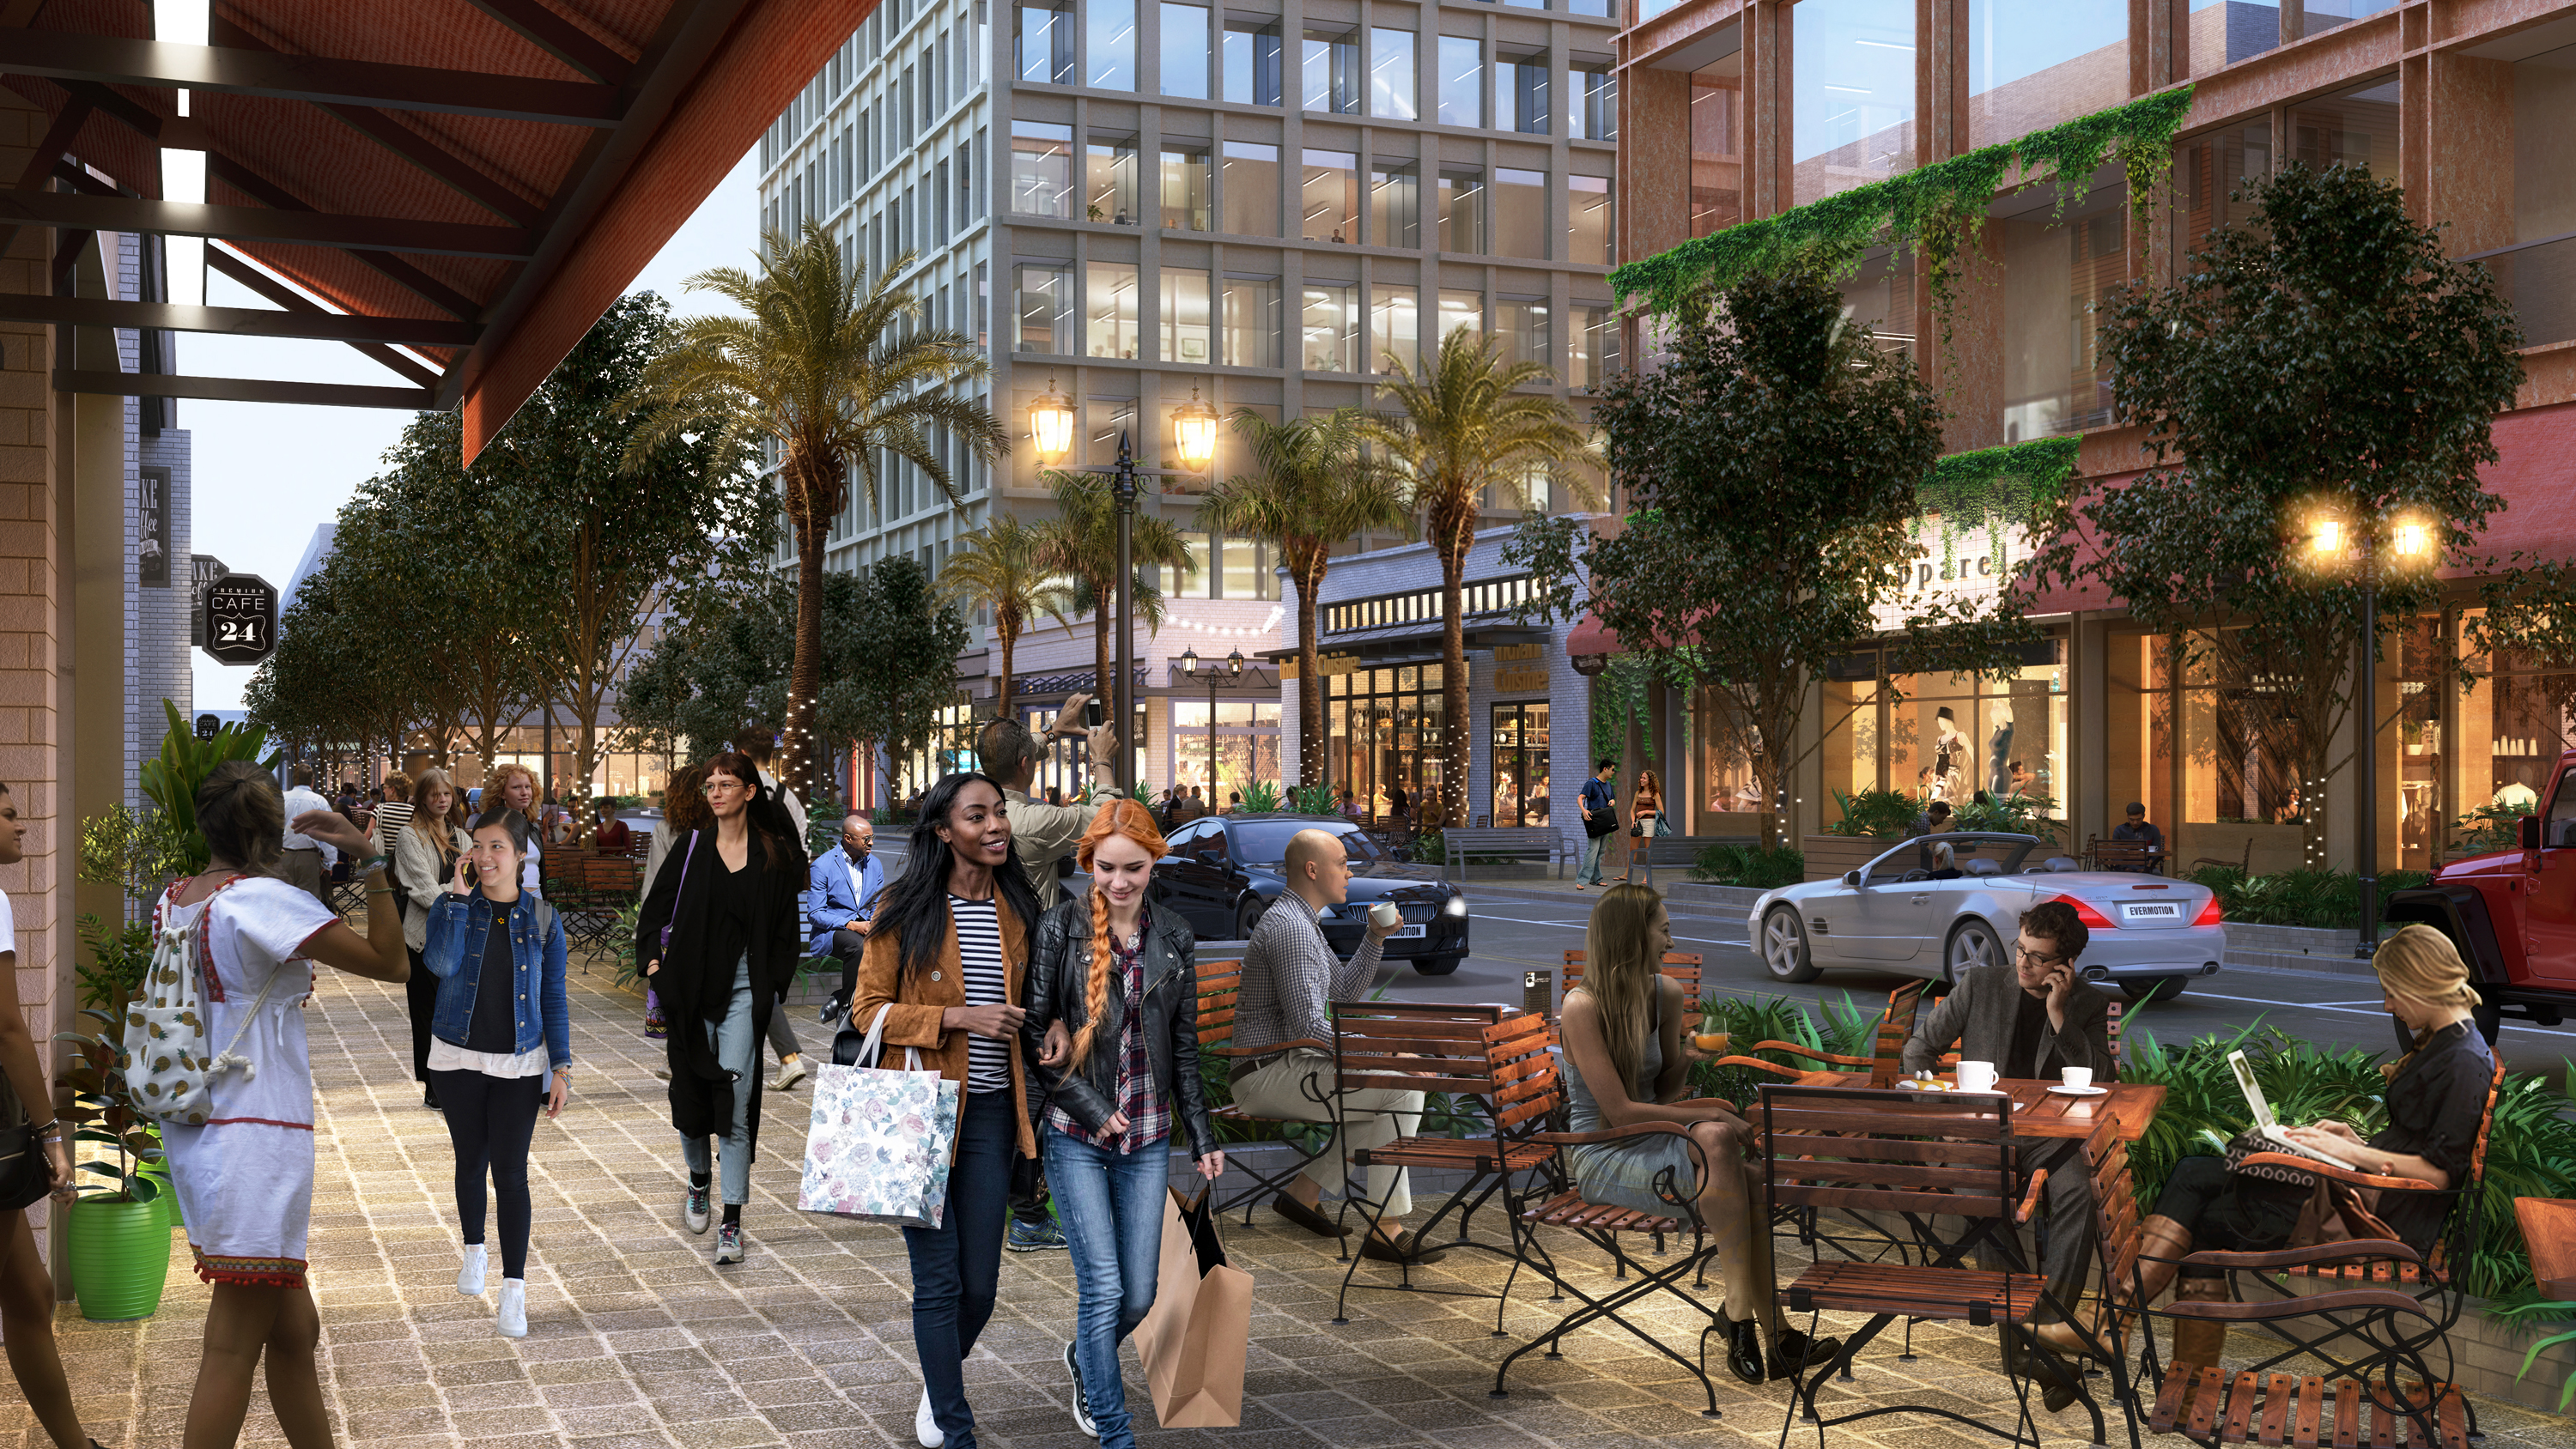 Going to the mall in Tampa? In the future, that could look very different